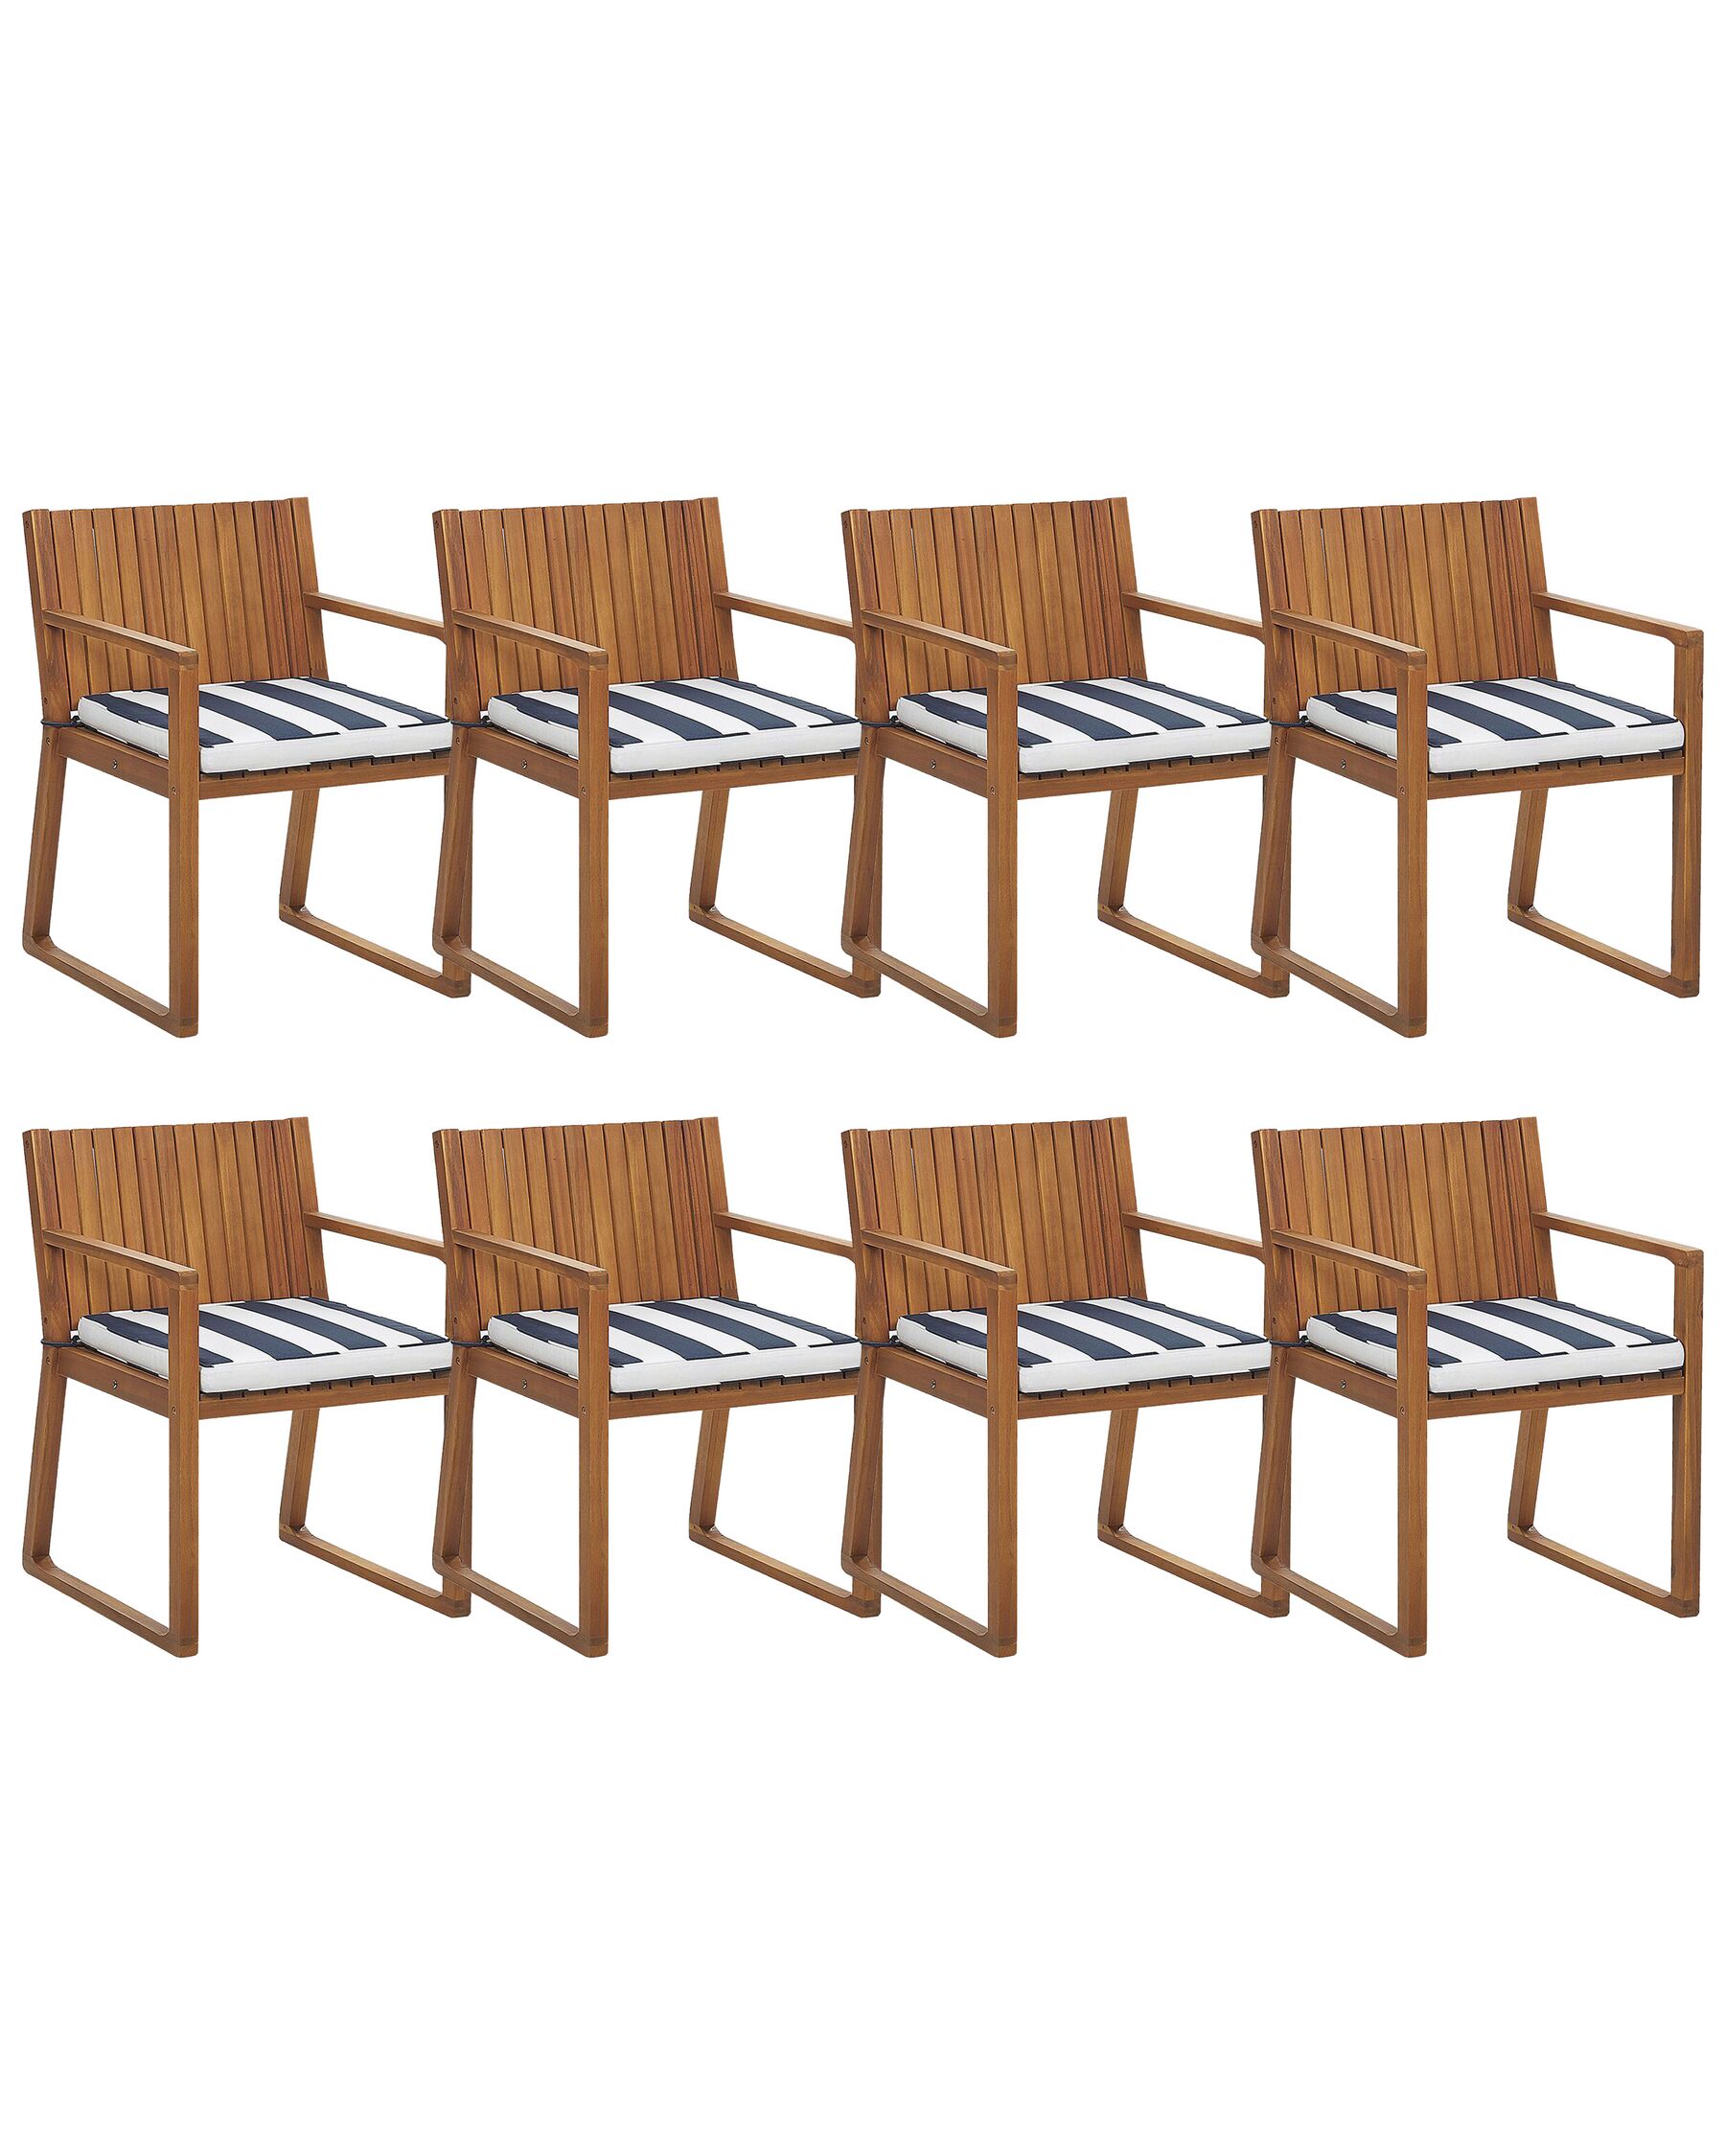 Set of 8 Acacia Wood Garden Dining Chairs with Navy Blue and White Cushions SASSARI_774891